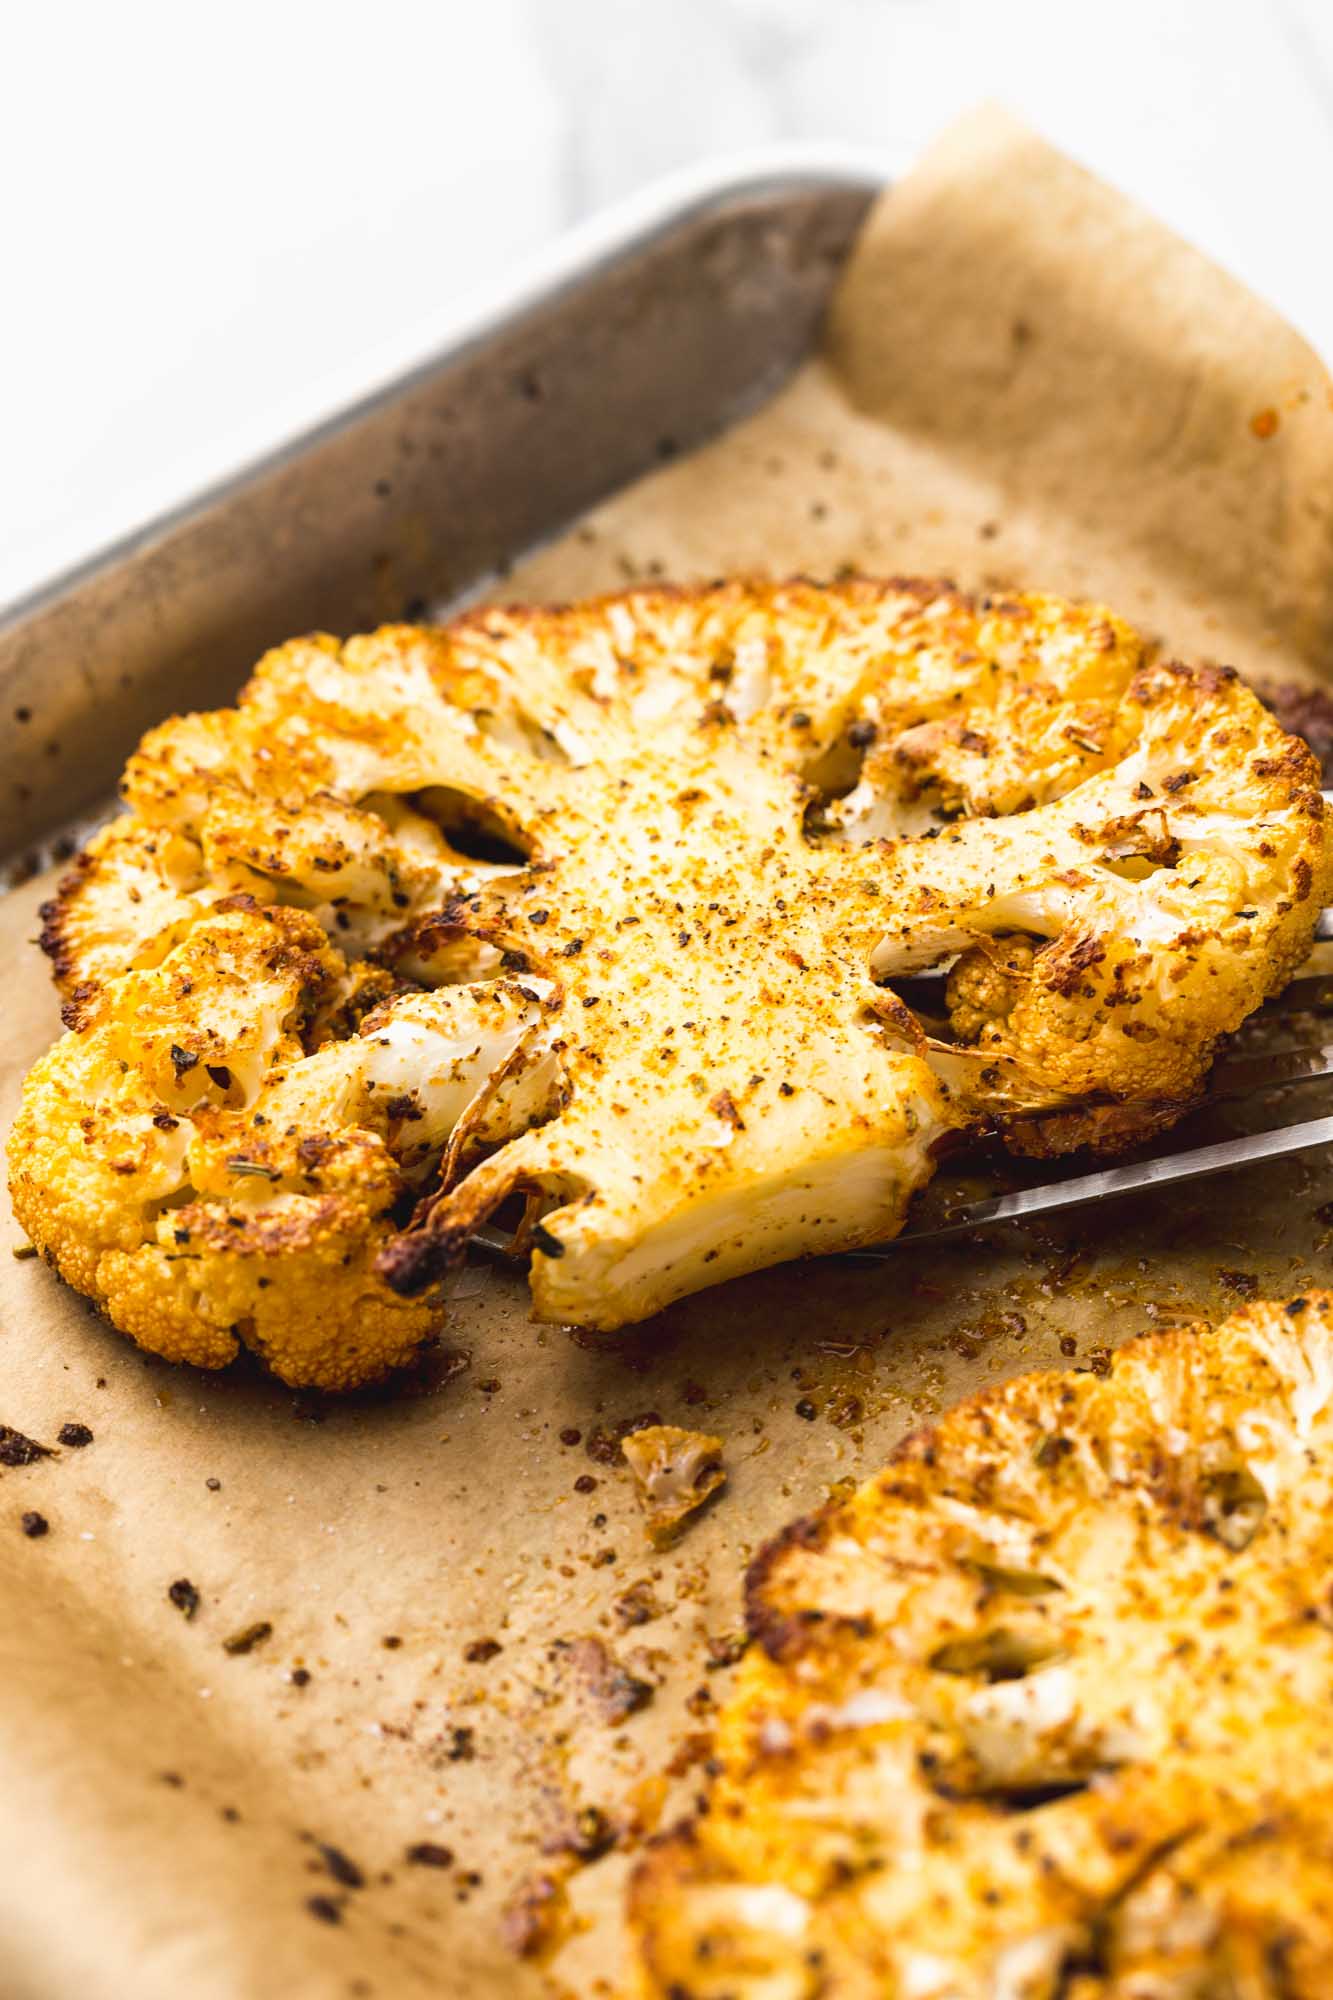 Taking a roasted cauliflower steak from the roasting pan